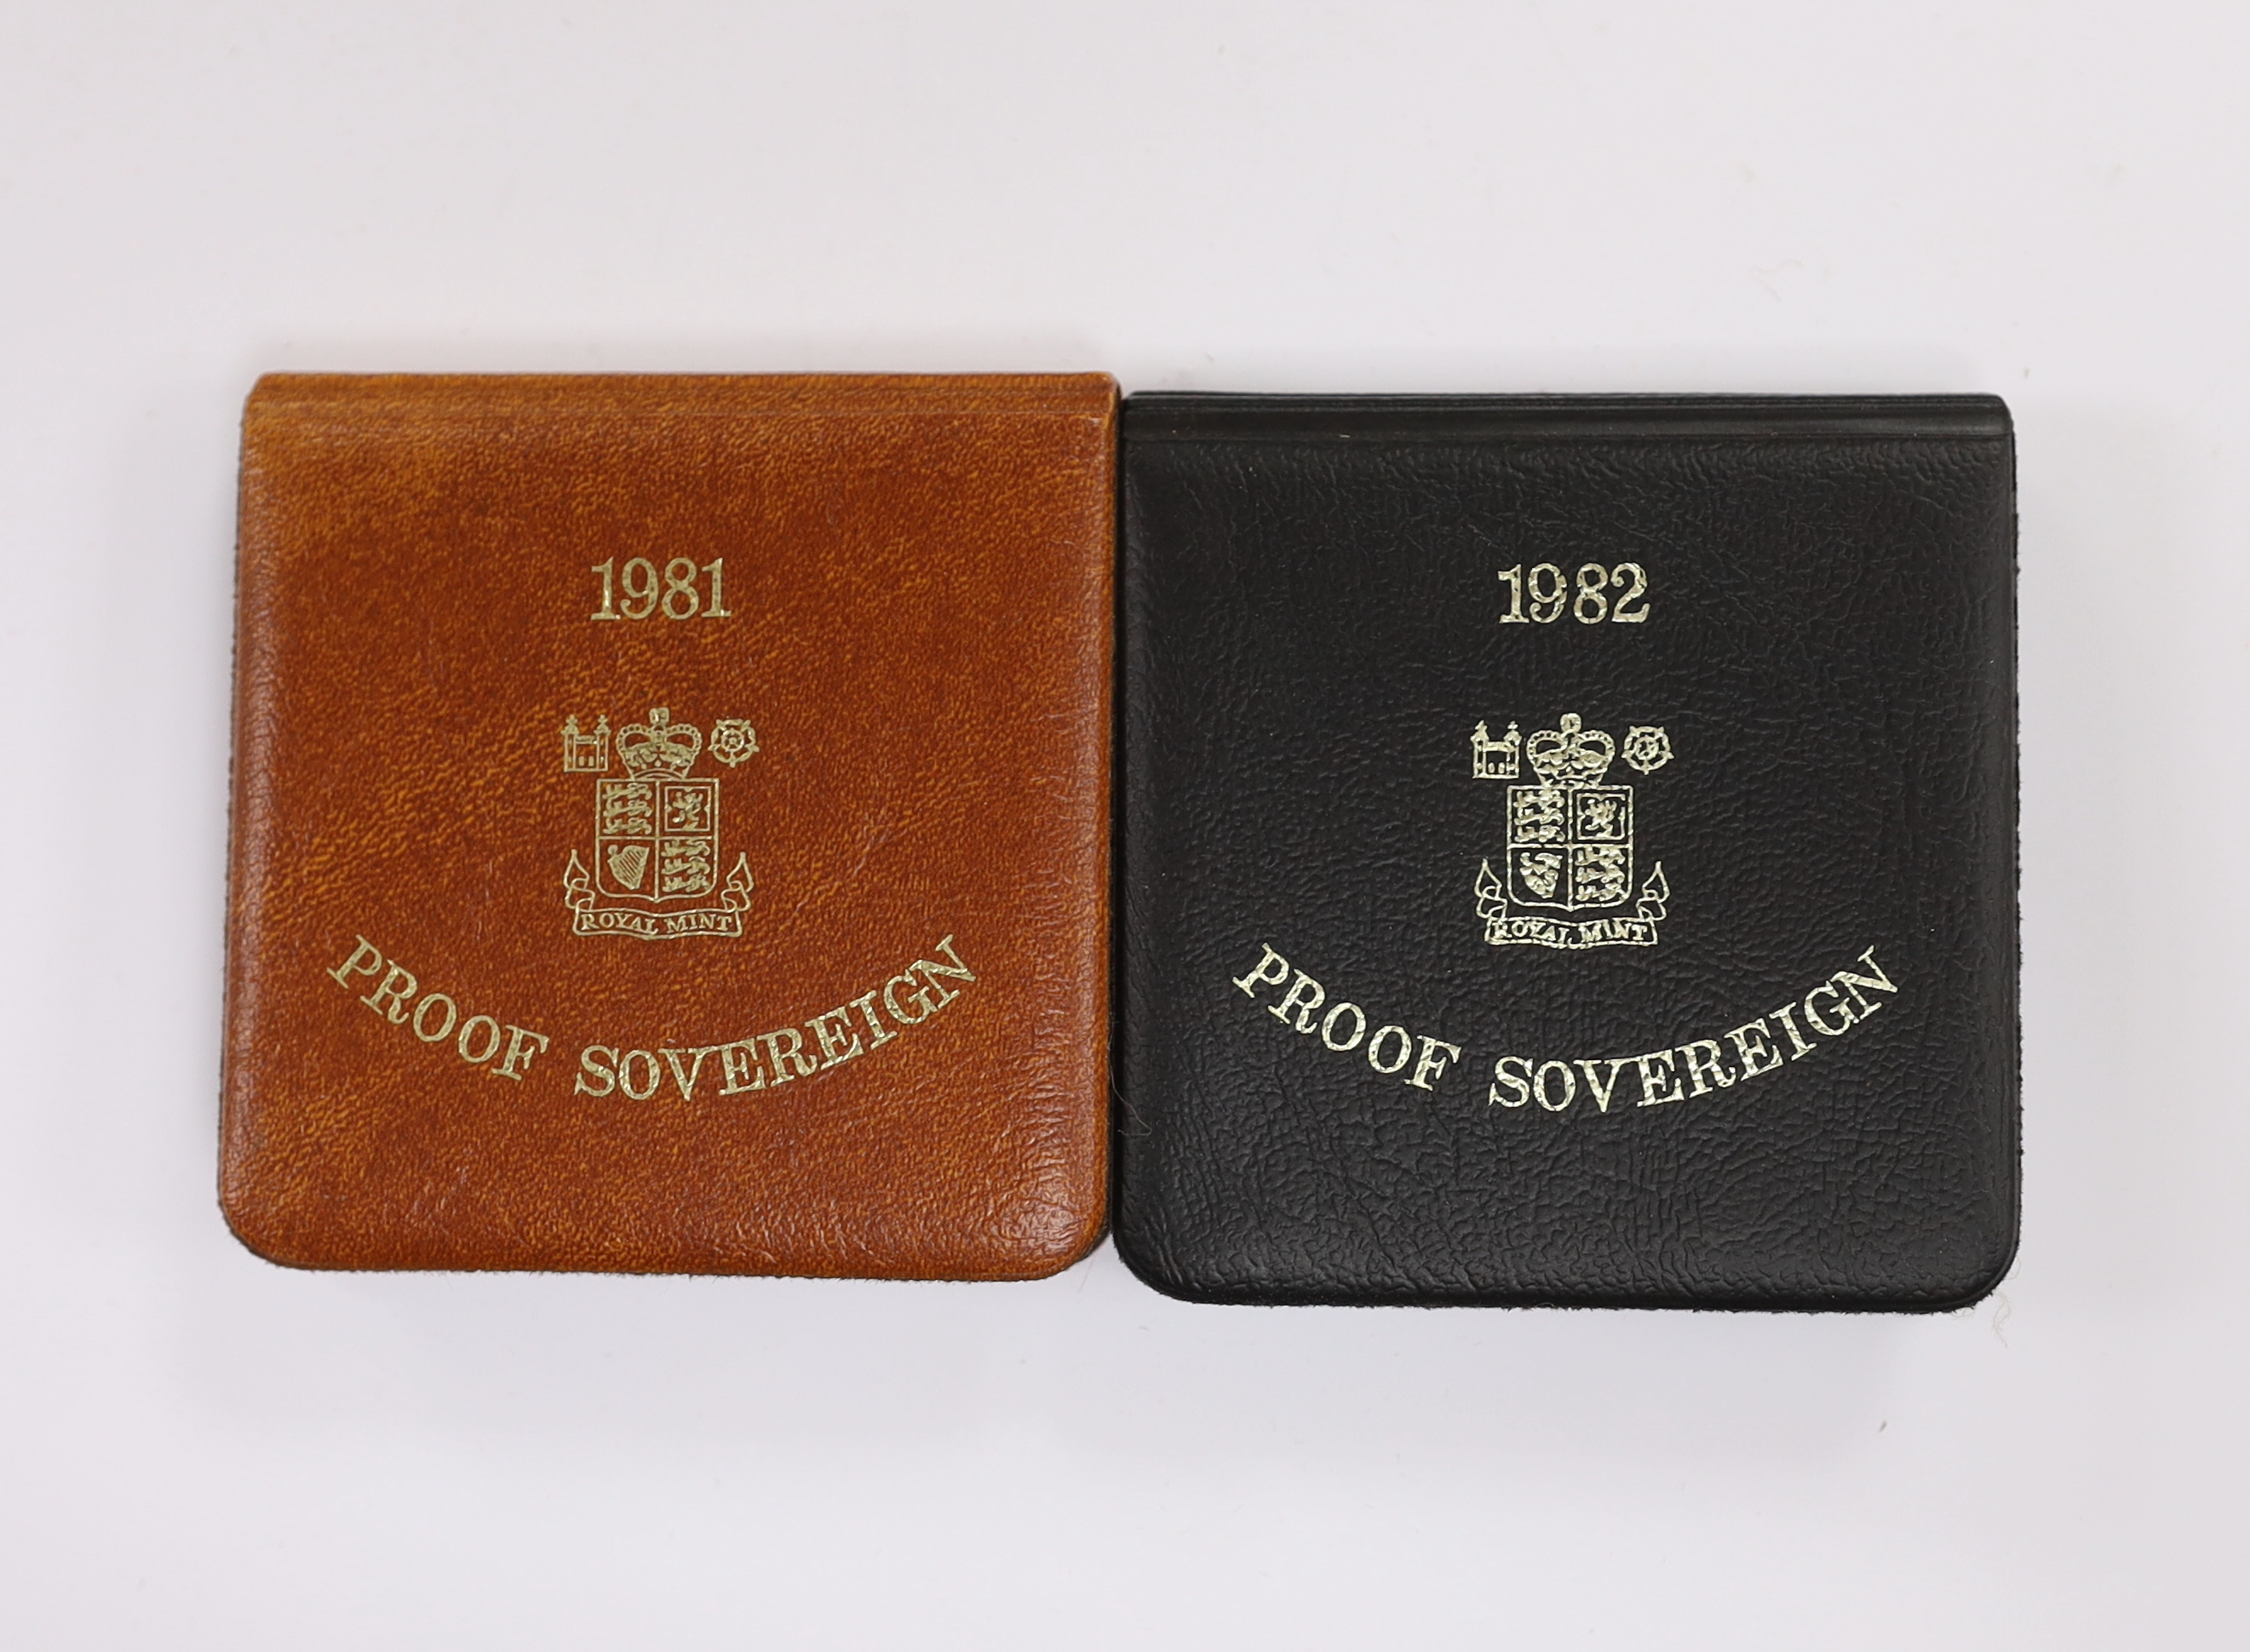 British gold coins - Two Royal Mint QEII Gold Proof Sovereigns, 1981 and 1982, both in case of issue - Image 4 of 4